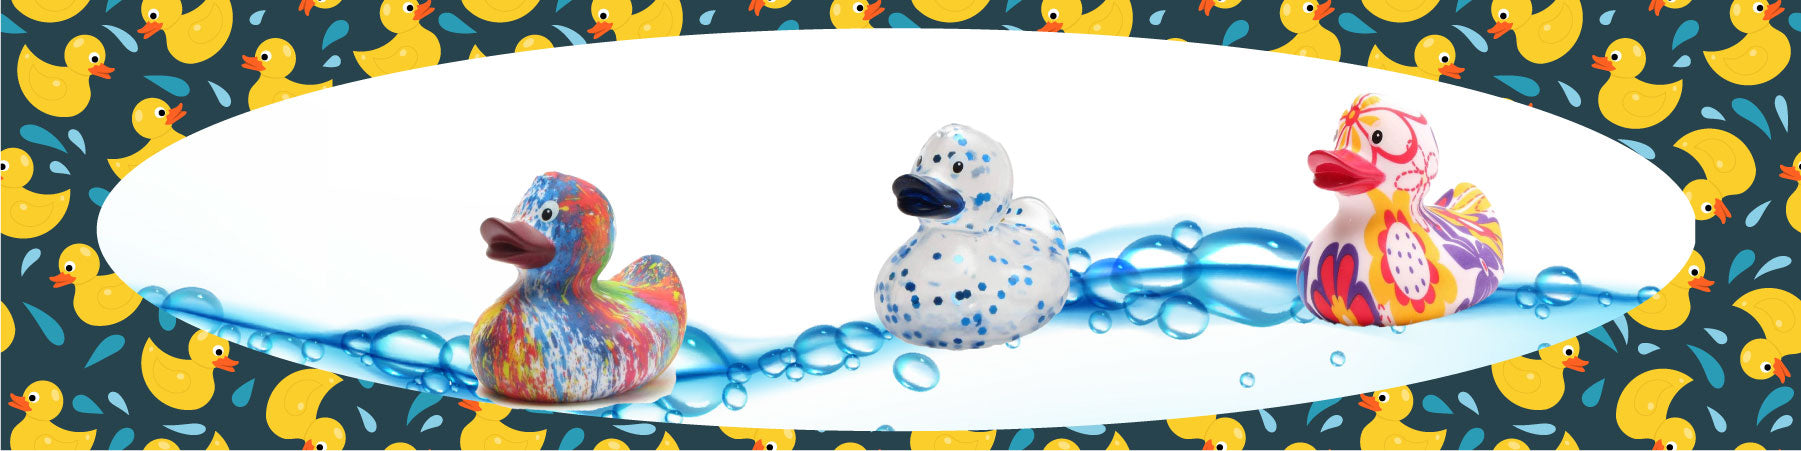 Dive into the Delightful World of Rubber Duckies!